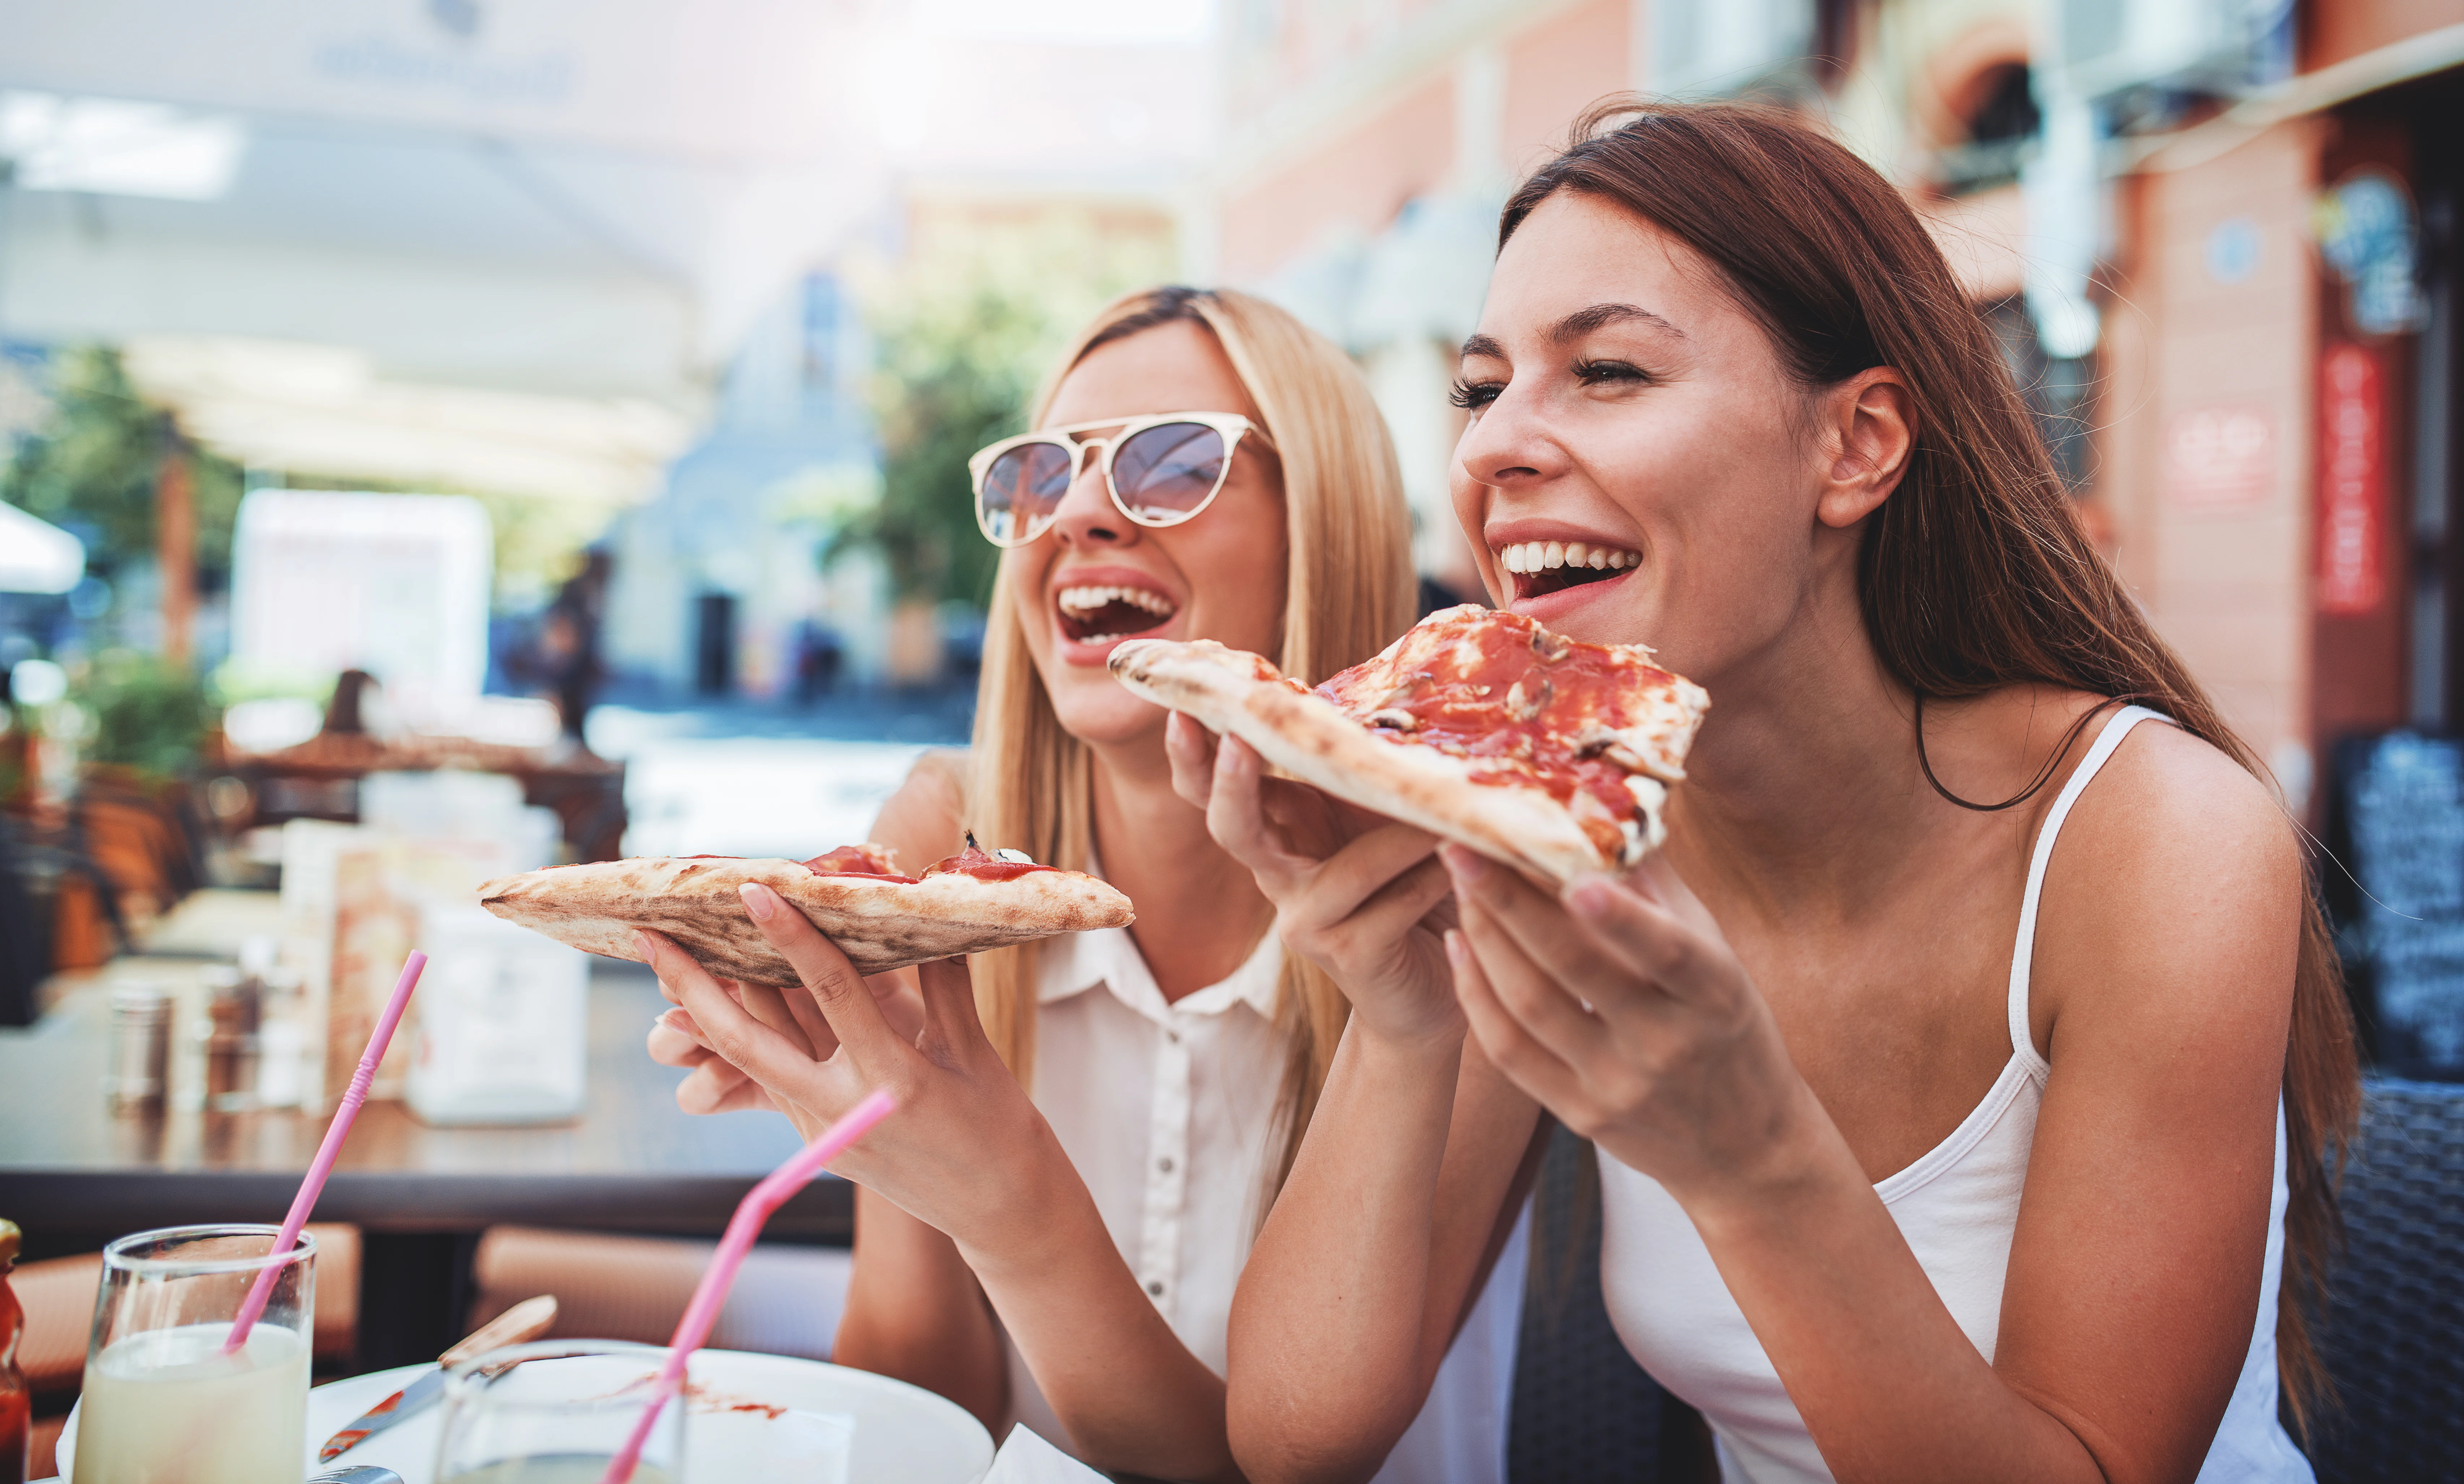 Two women eating pizza and laughing